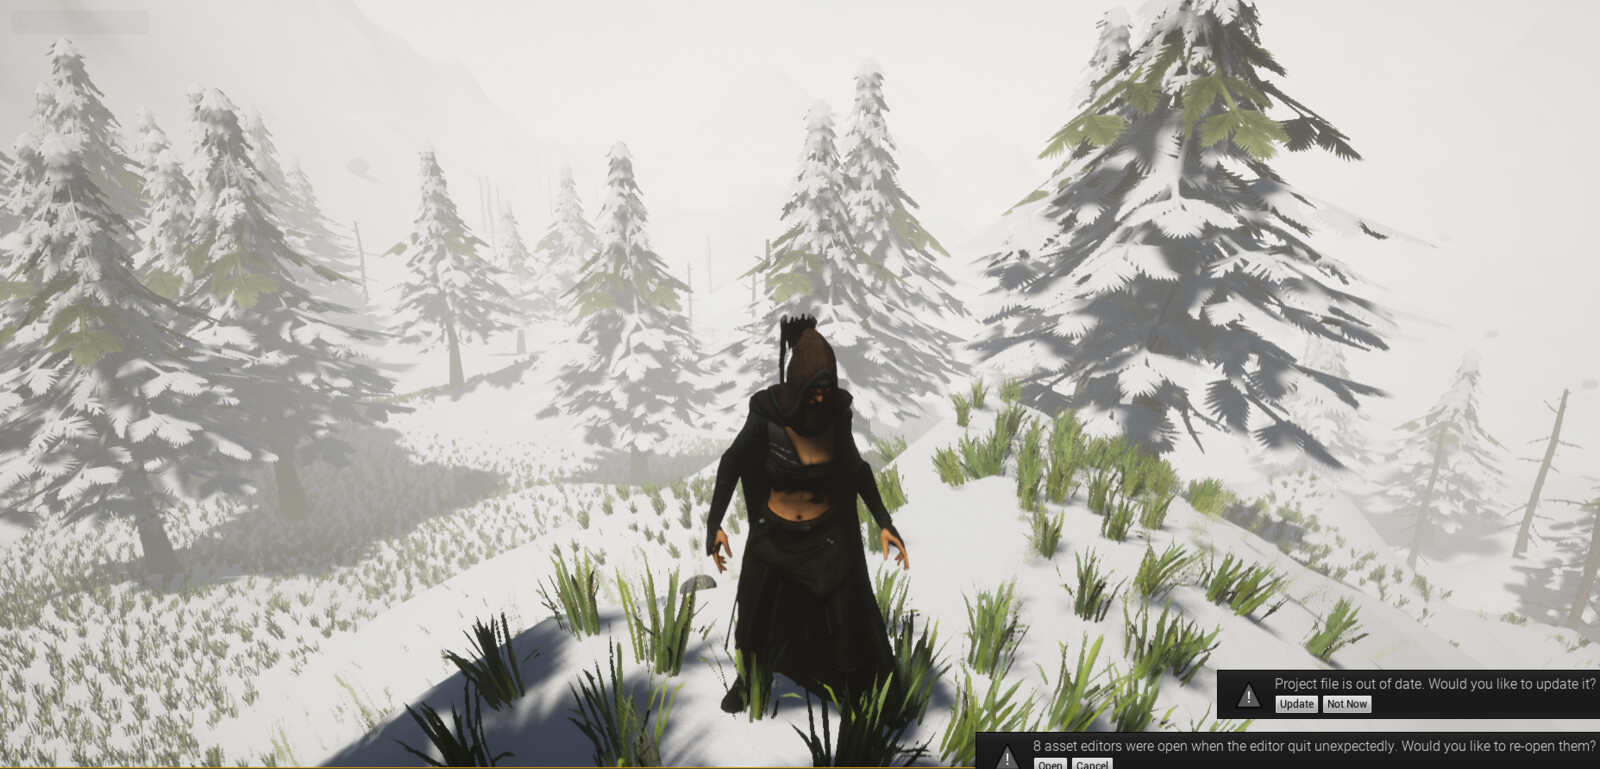 TheLabyrinth Dev - Who want's to build a snow man?